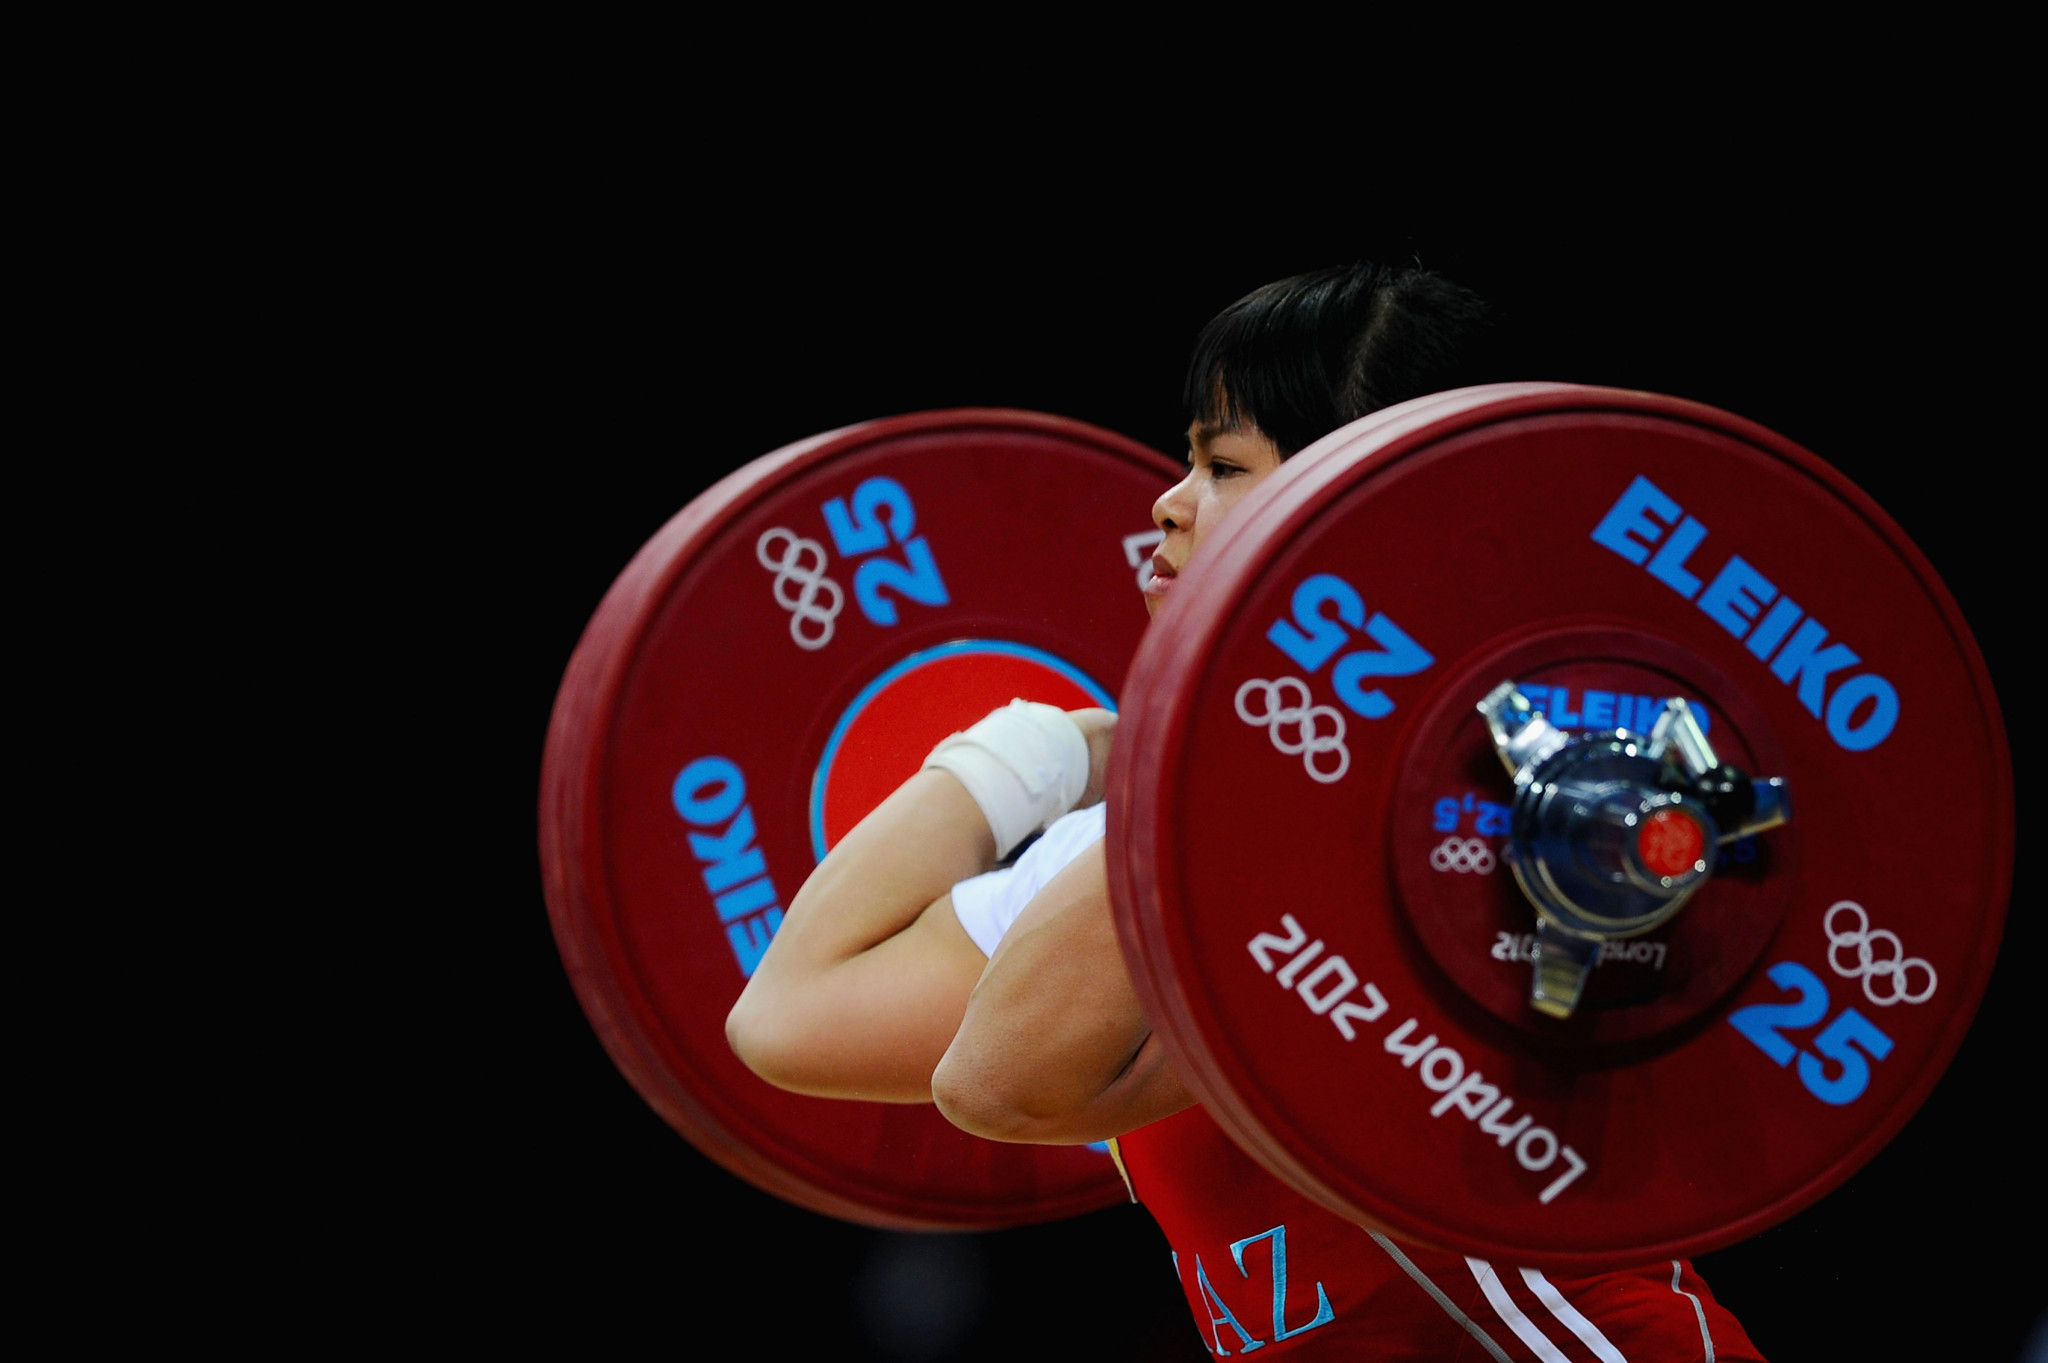 Zulfiya Chinshanlo was among four athletes from Kazakhstan to lose a London 2012 gold medal ©Getty Images